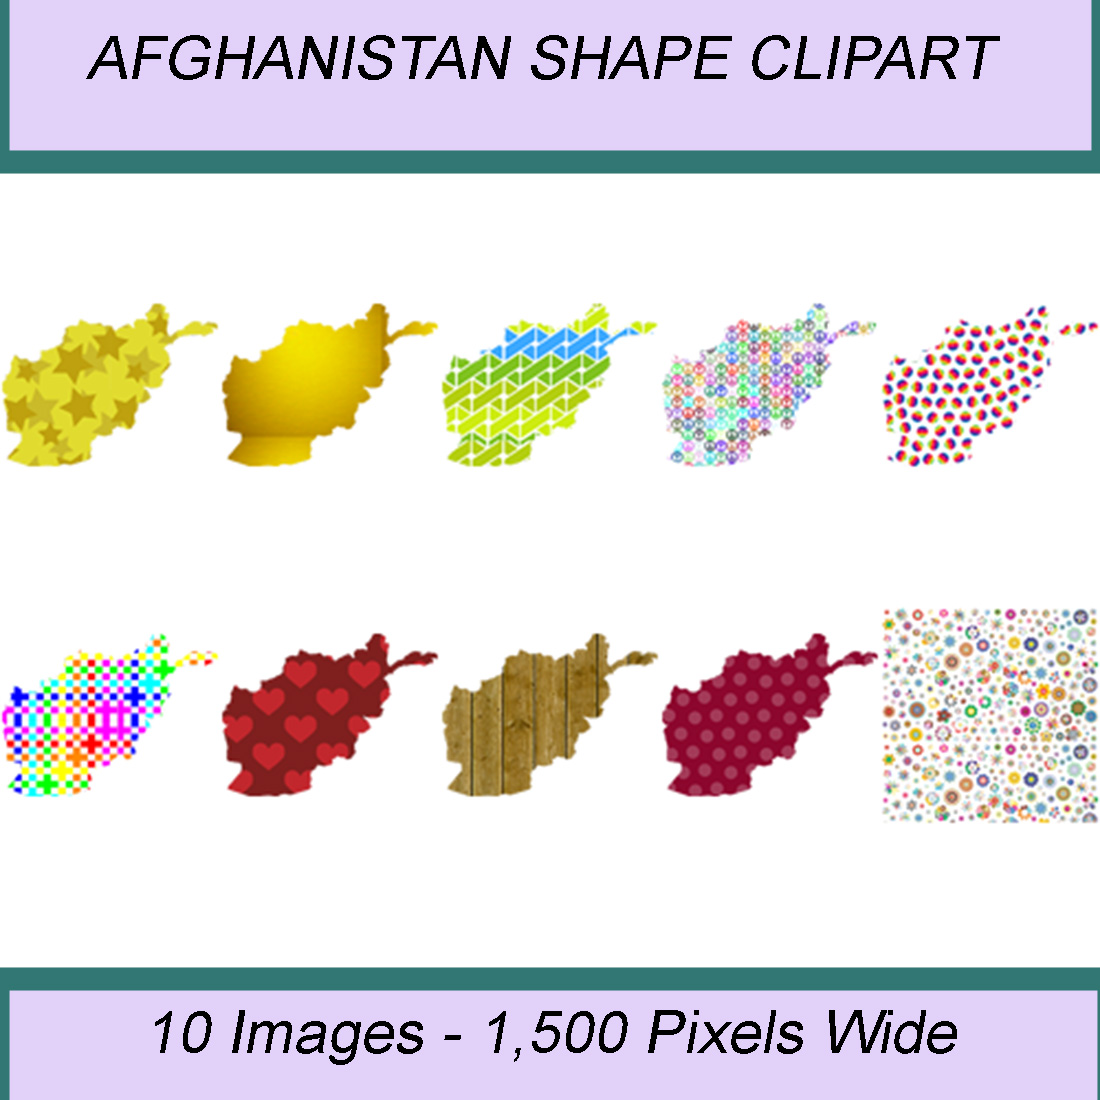 AFGHANISTAN SHAPE CLIPART ICONS cover image.